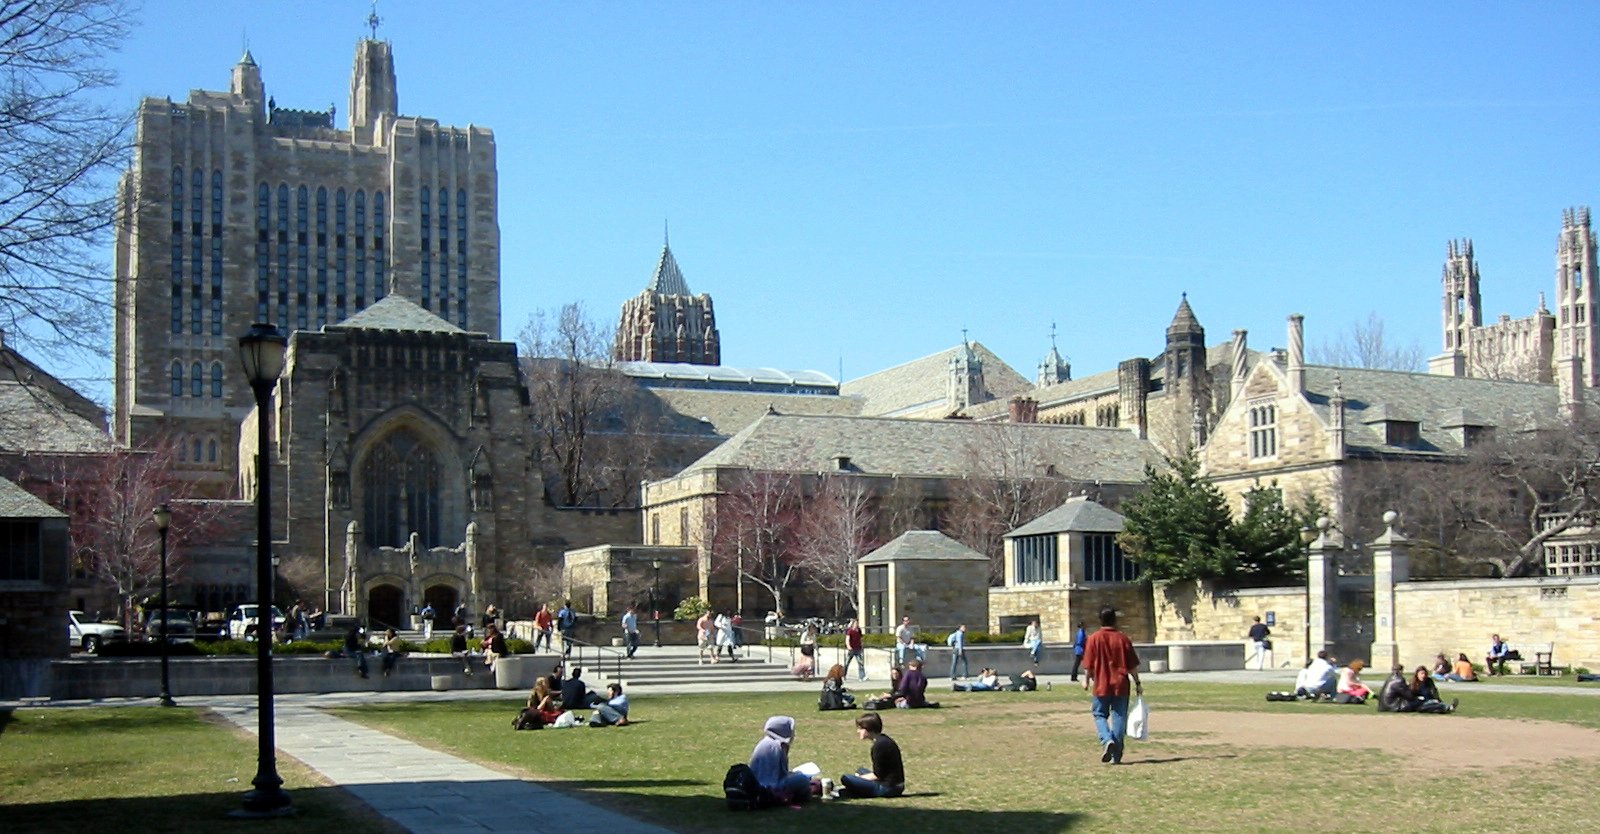 In 2015, Yale University refused admission own course on programming in favor of CS50.